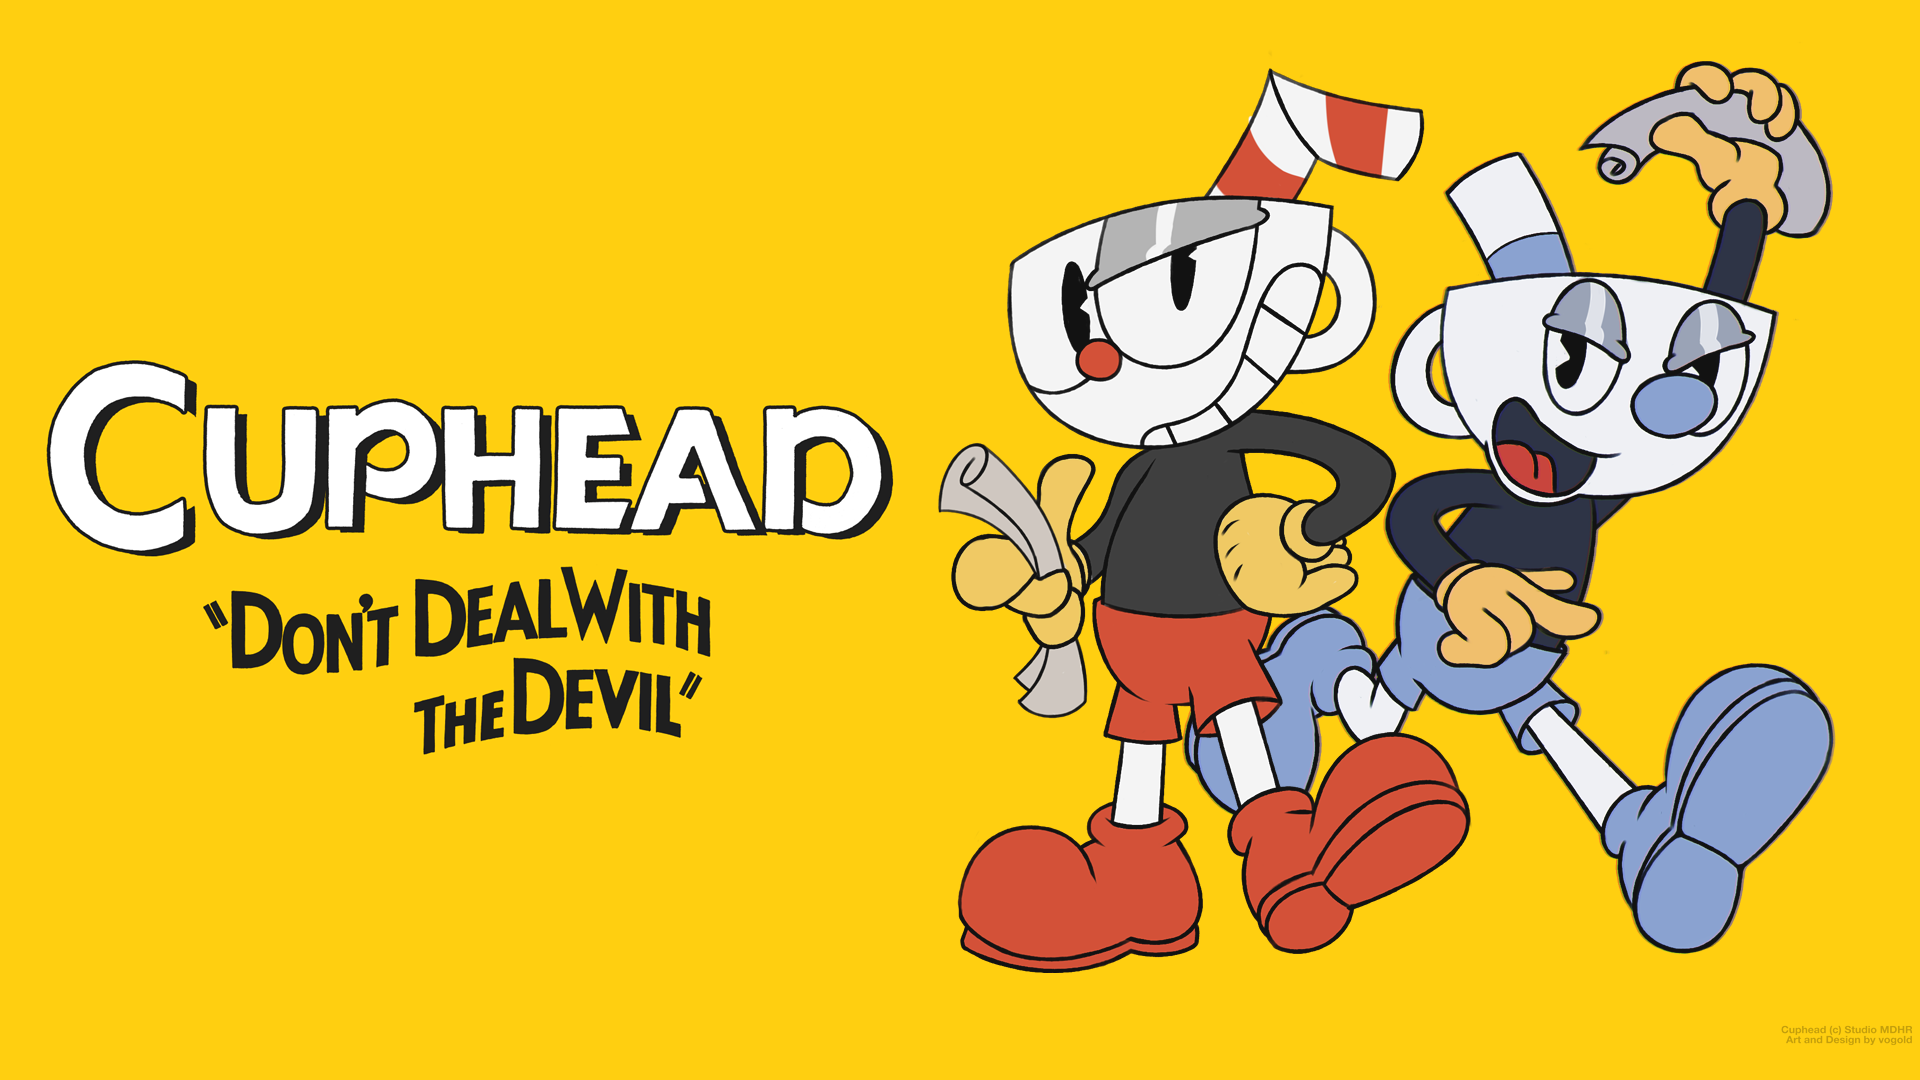 How To Download Cuphead For Free On Android